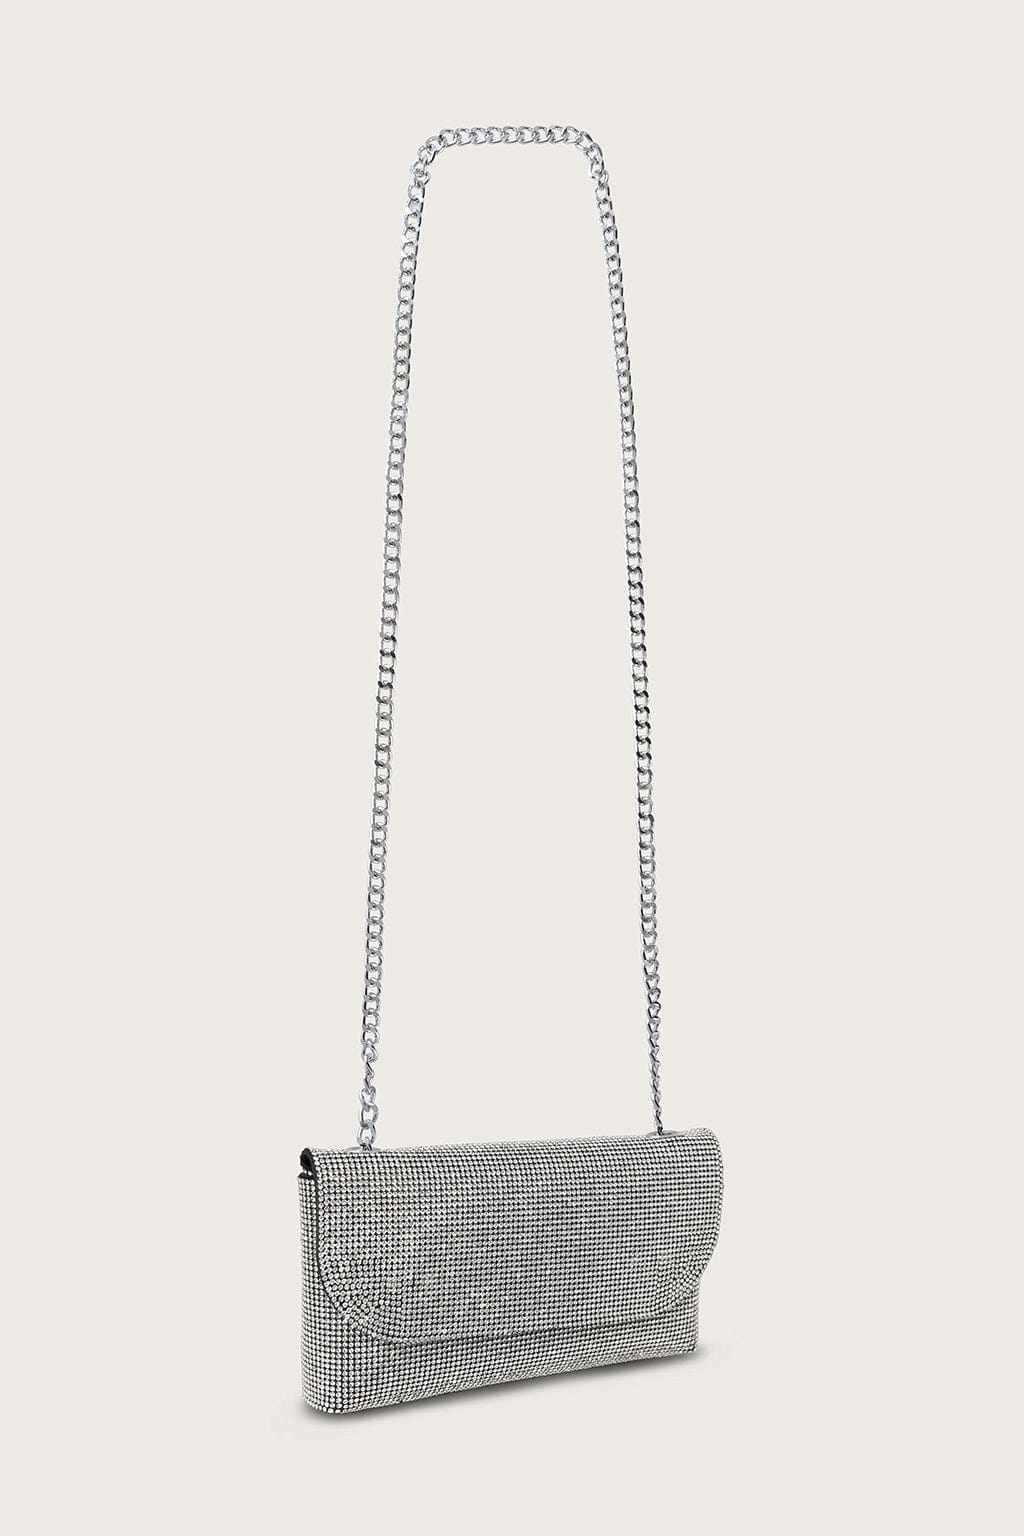 EMMIE Embellished Diamante Mini Bag in Silver Chainmail